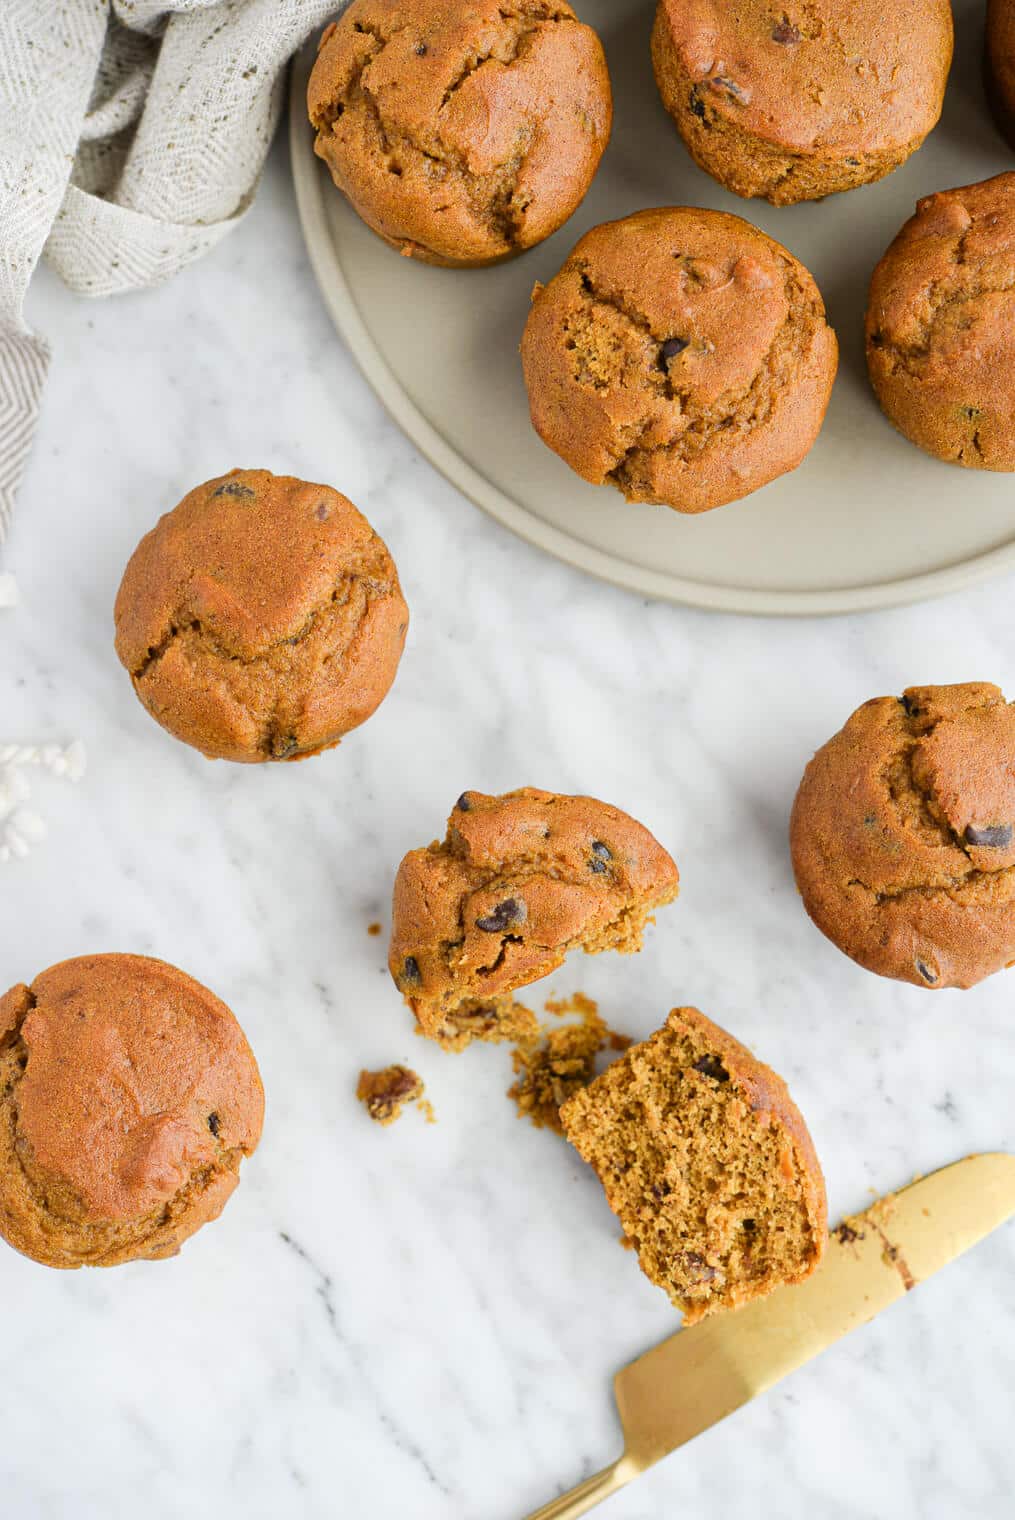 the top view of a plate of pumpkin chocolate chip muffins sitting on a marble countertop next to 4 pumpkin muffins, one of which has been sliced open with a gold butter knife